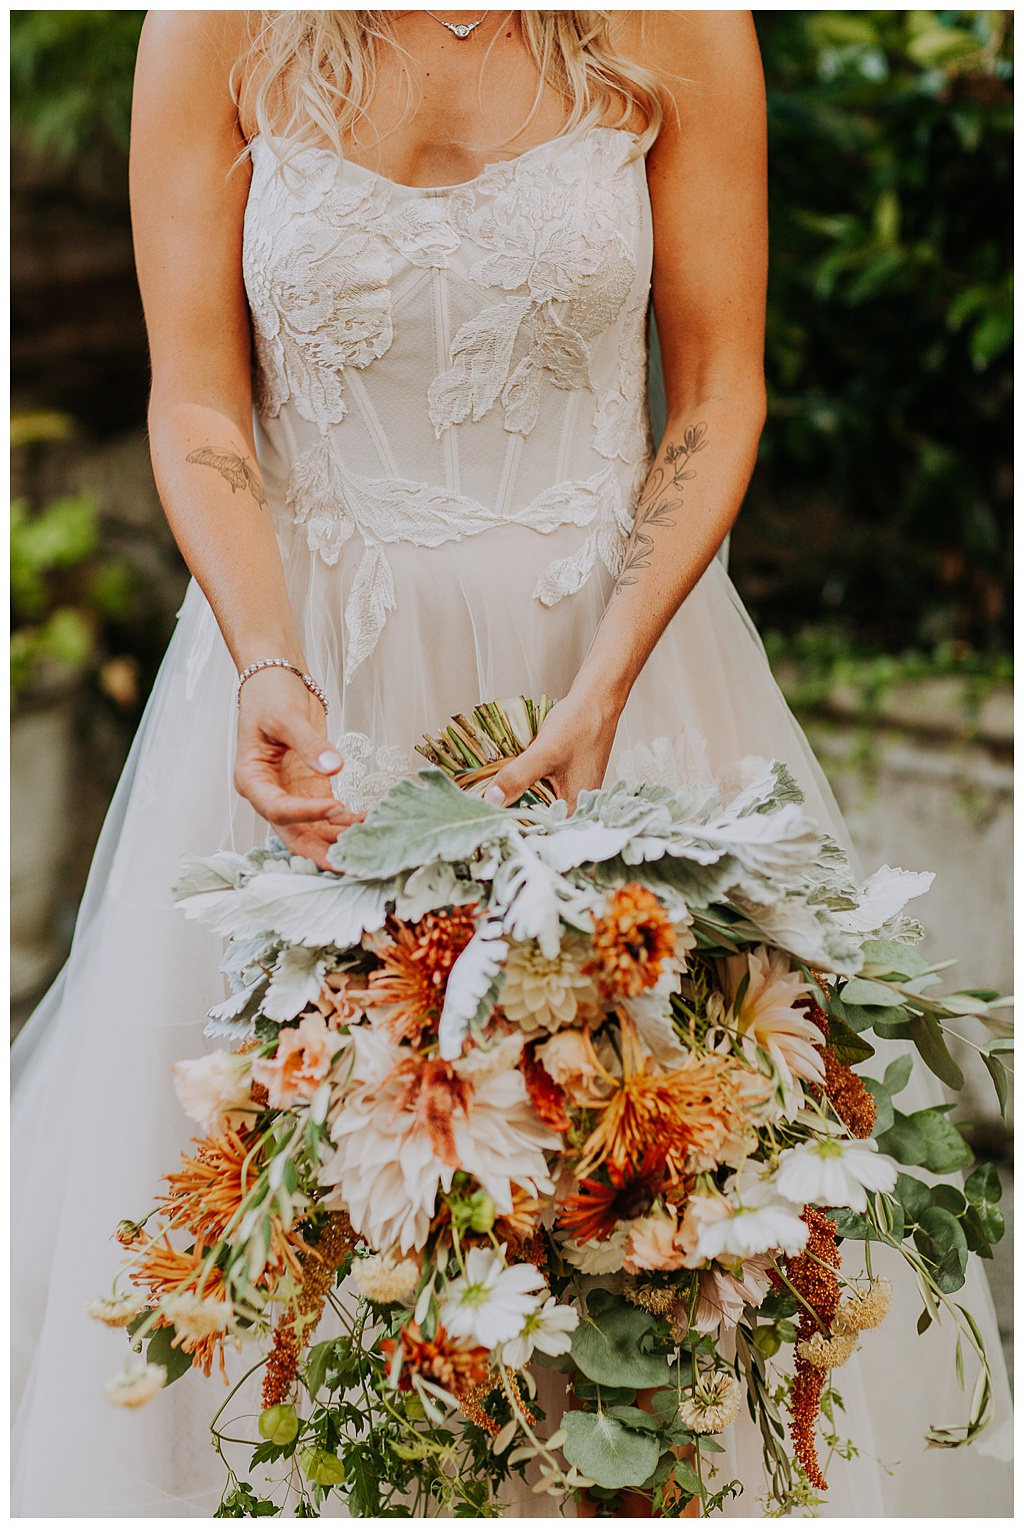 The bride holds the bouquet full of fall wedding flowers